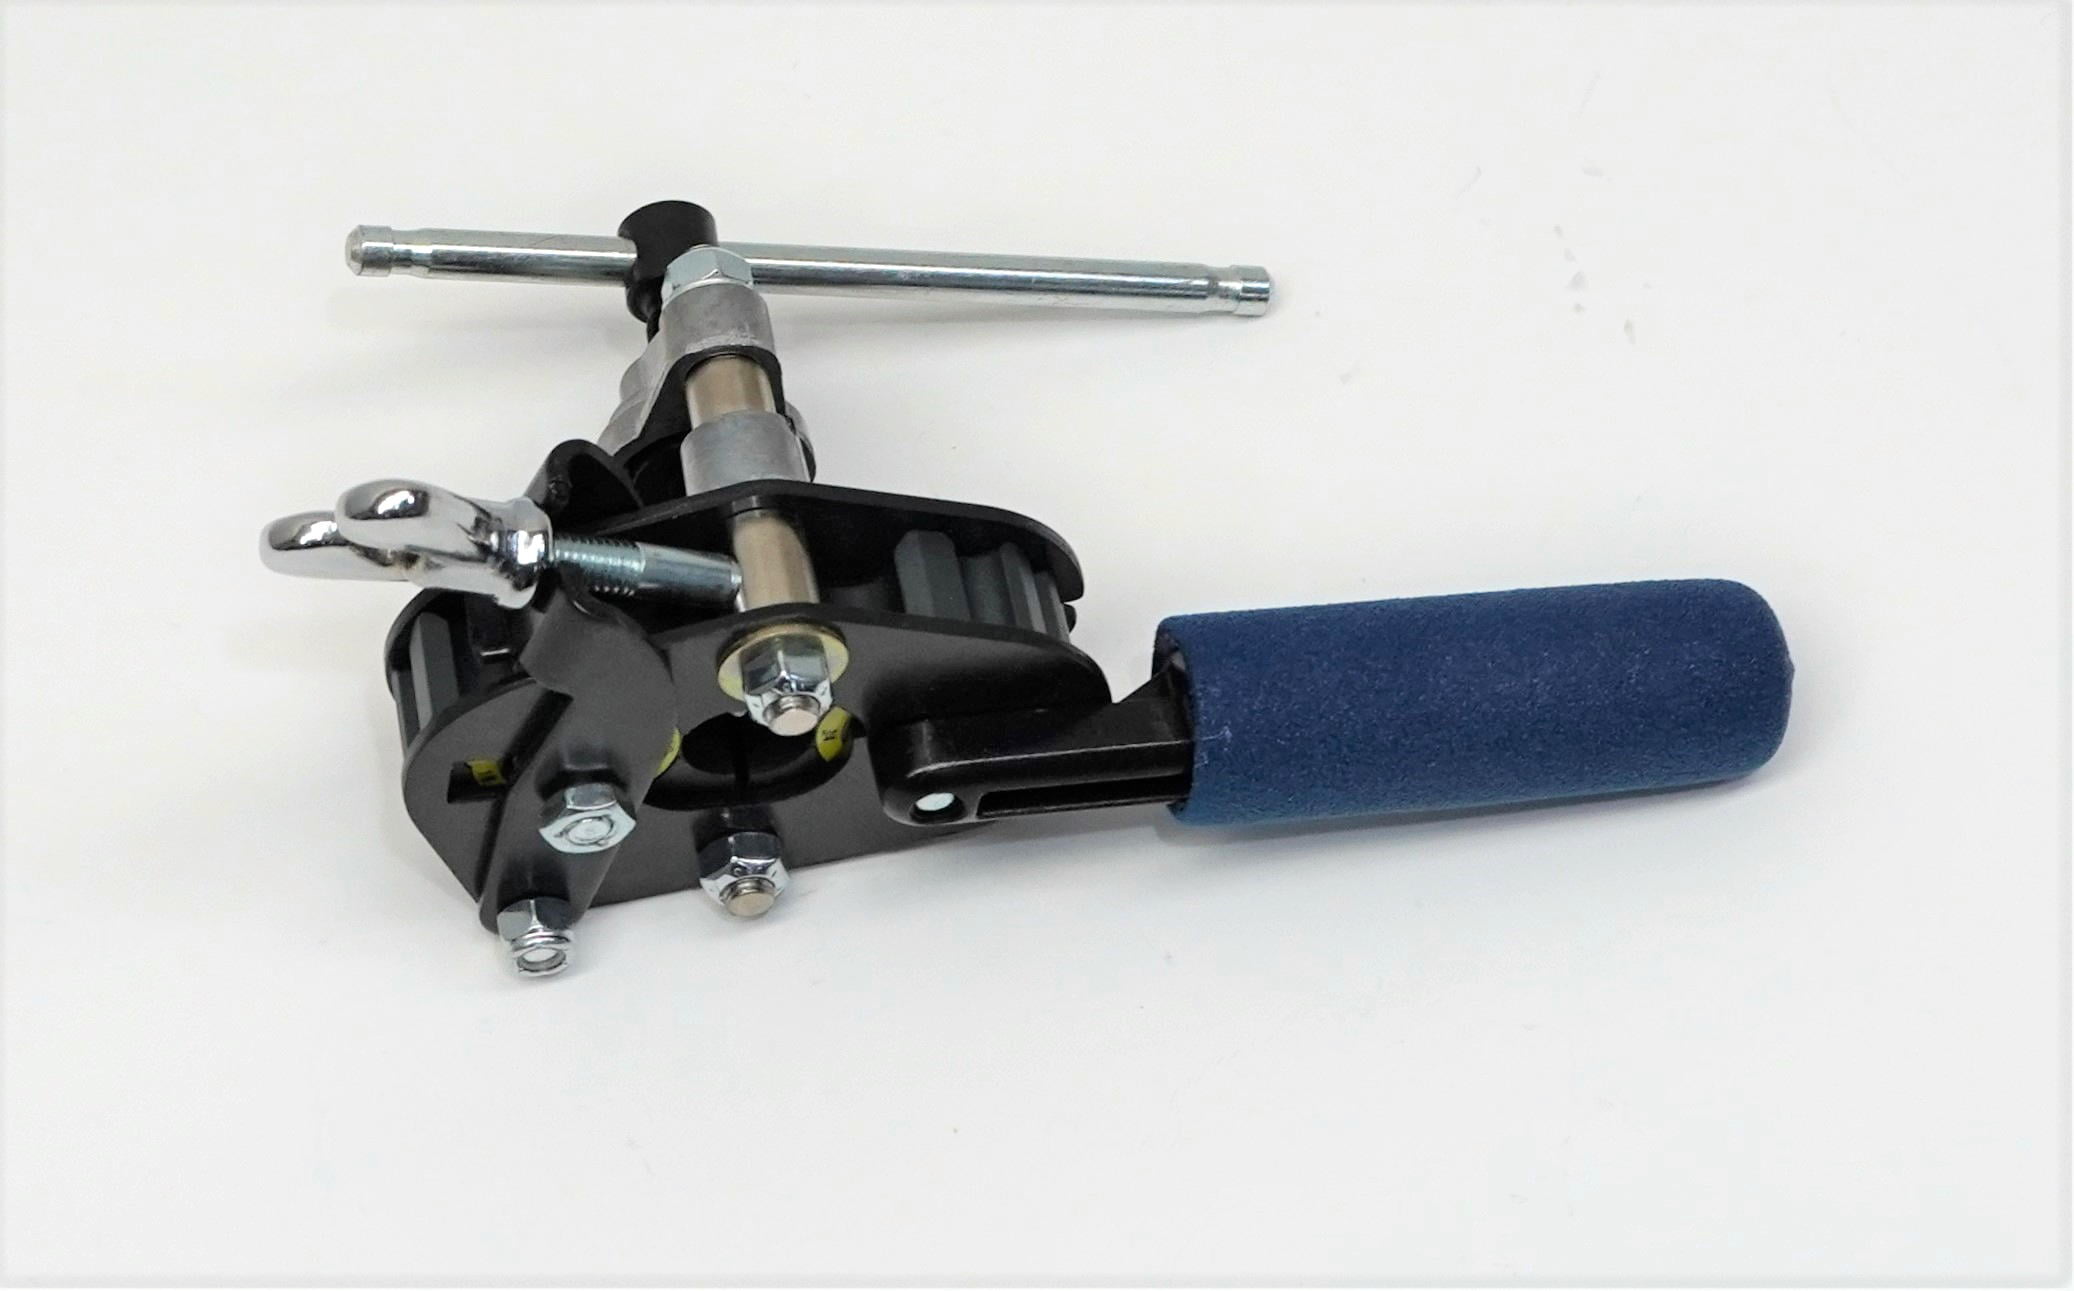 ELLOW JACKET 60278 45 Degree Deluxe Flaring Tool for sale online 